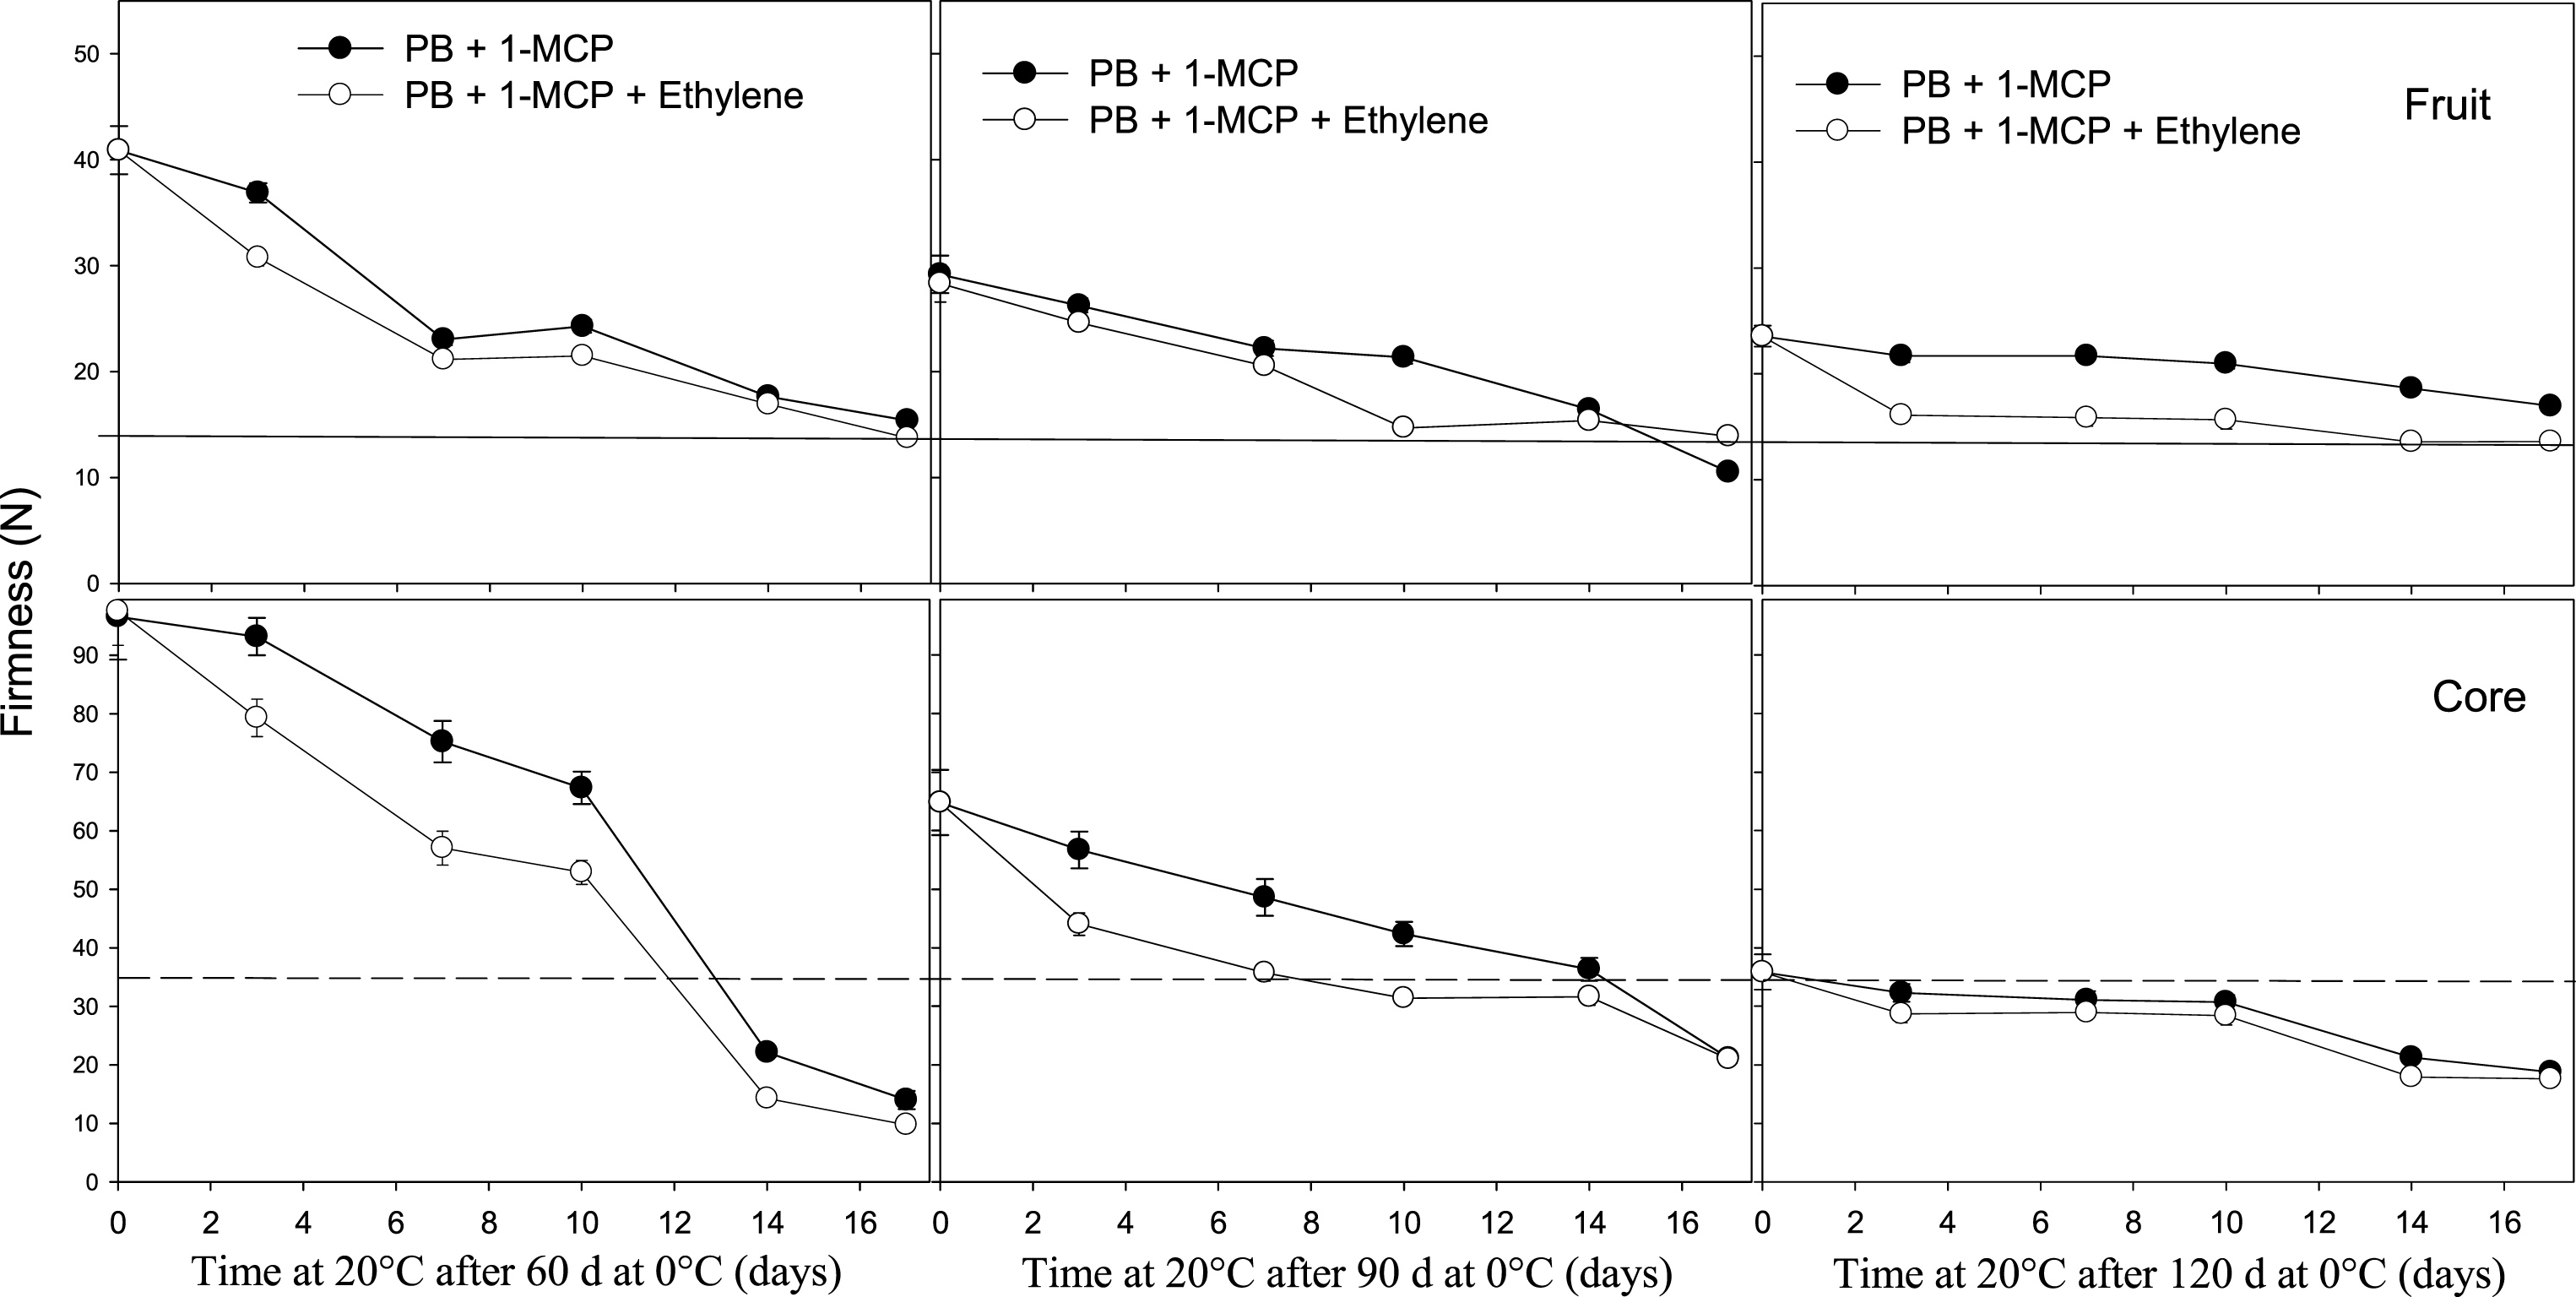 Effect of ethylene on softening of whole kiwifruit or core tissue during ripening at 20°C after storage for 60, 90 or 120 days at 0°C. Ethylene (100 μl l–1) was applied at 20°C for 12 h after removing fruit treated with 1 μl l–1 of 1-MCP at harvest and packed in a perforated bag (PB). The solid and dotted horizontal lines indicate the ready to eat firmness value (<13 N) and soft core firmness perception (<35.5 N) receptively. The vertical bar represents the standard error of the firmness mean of 4 replicates of 15 fruit each.